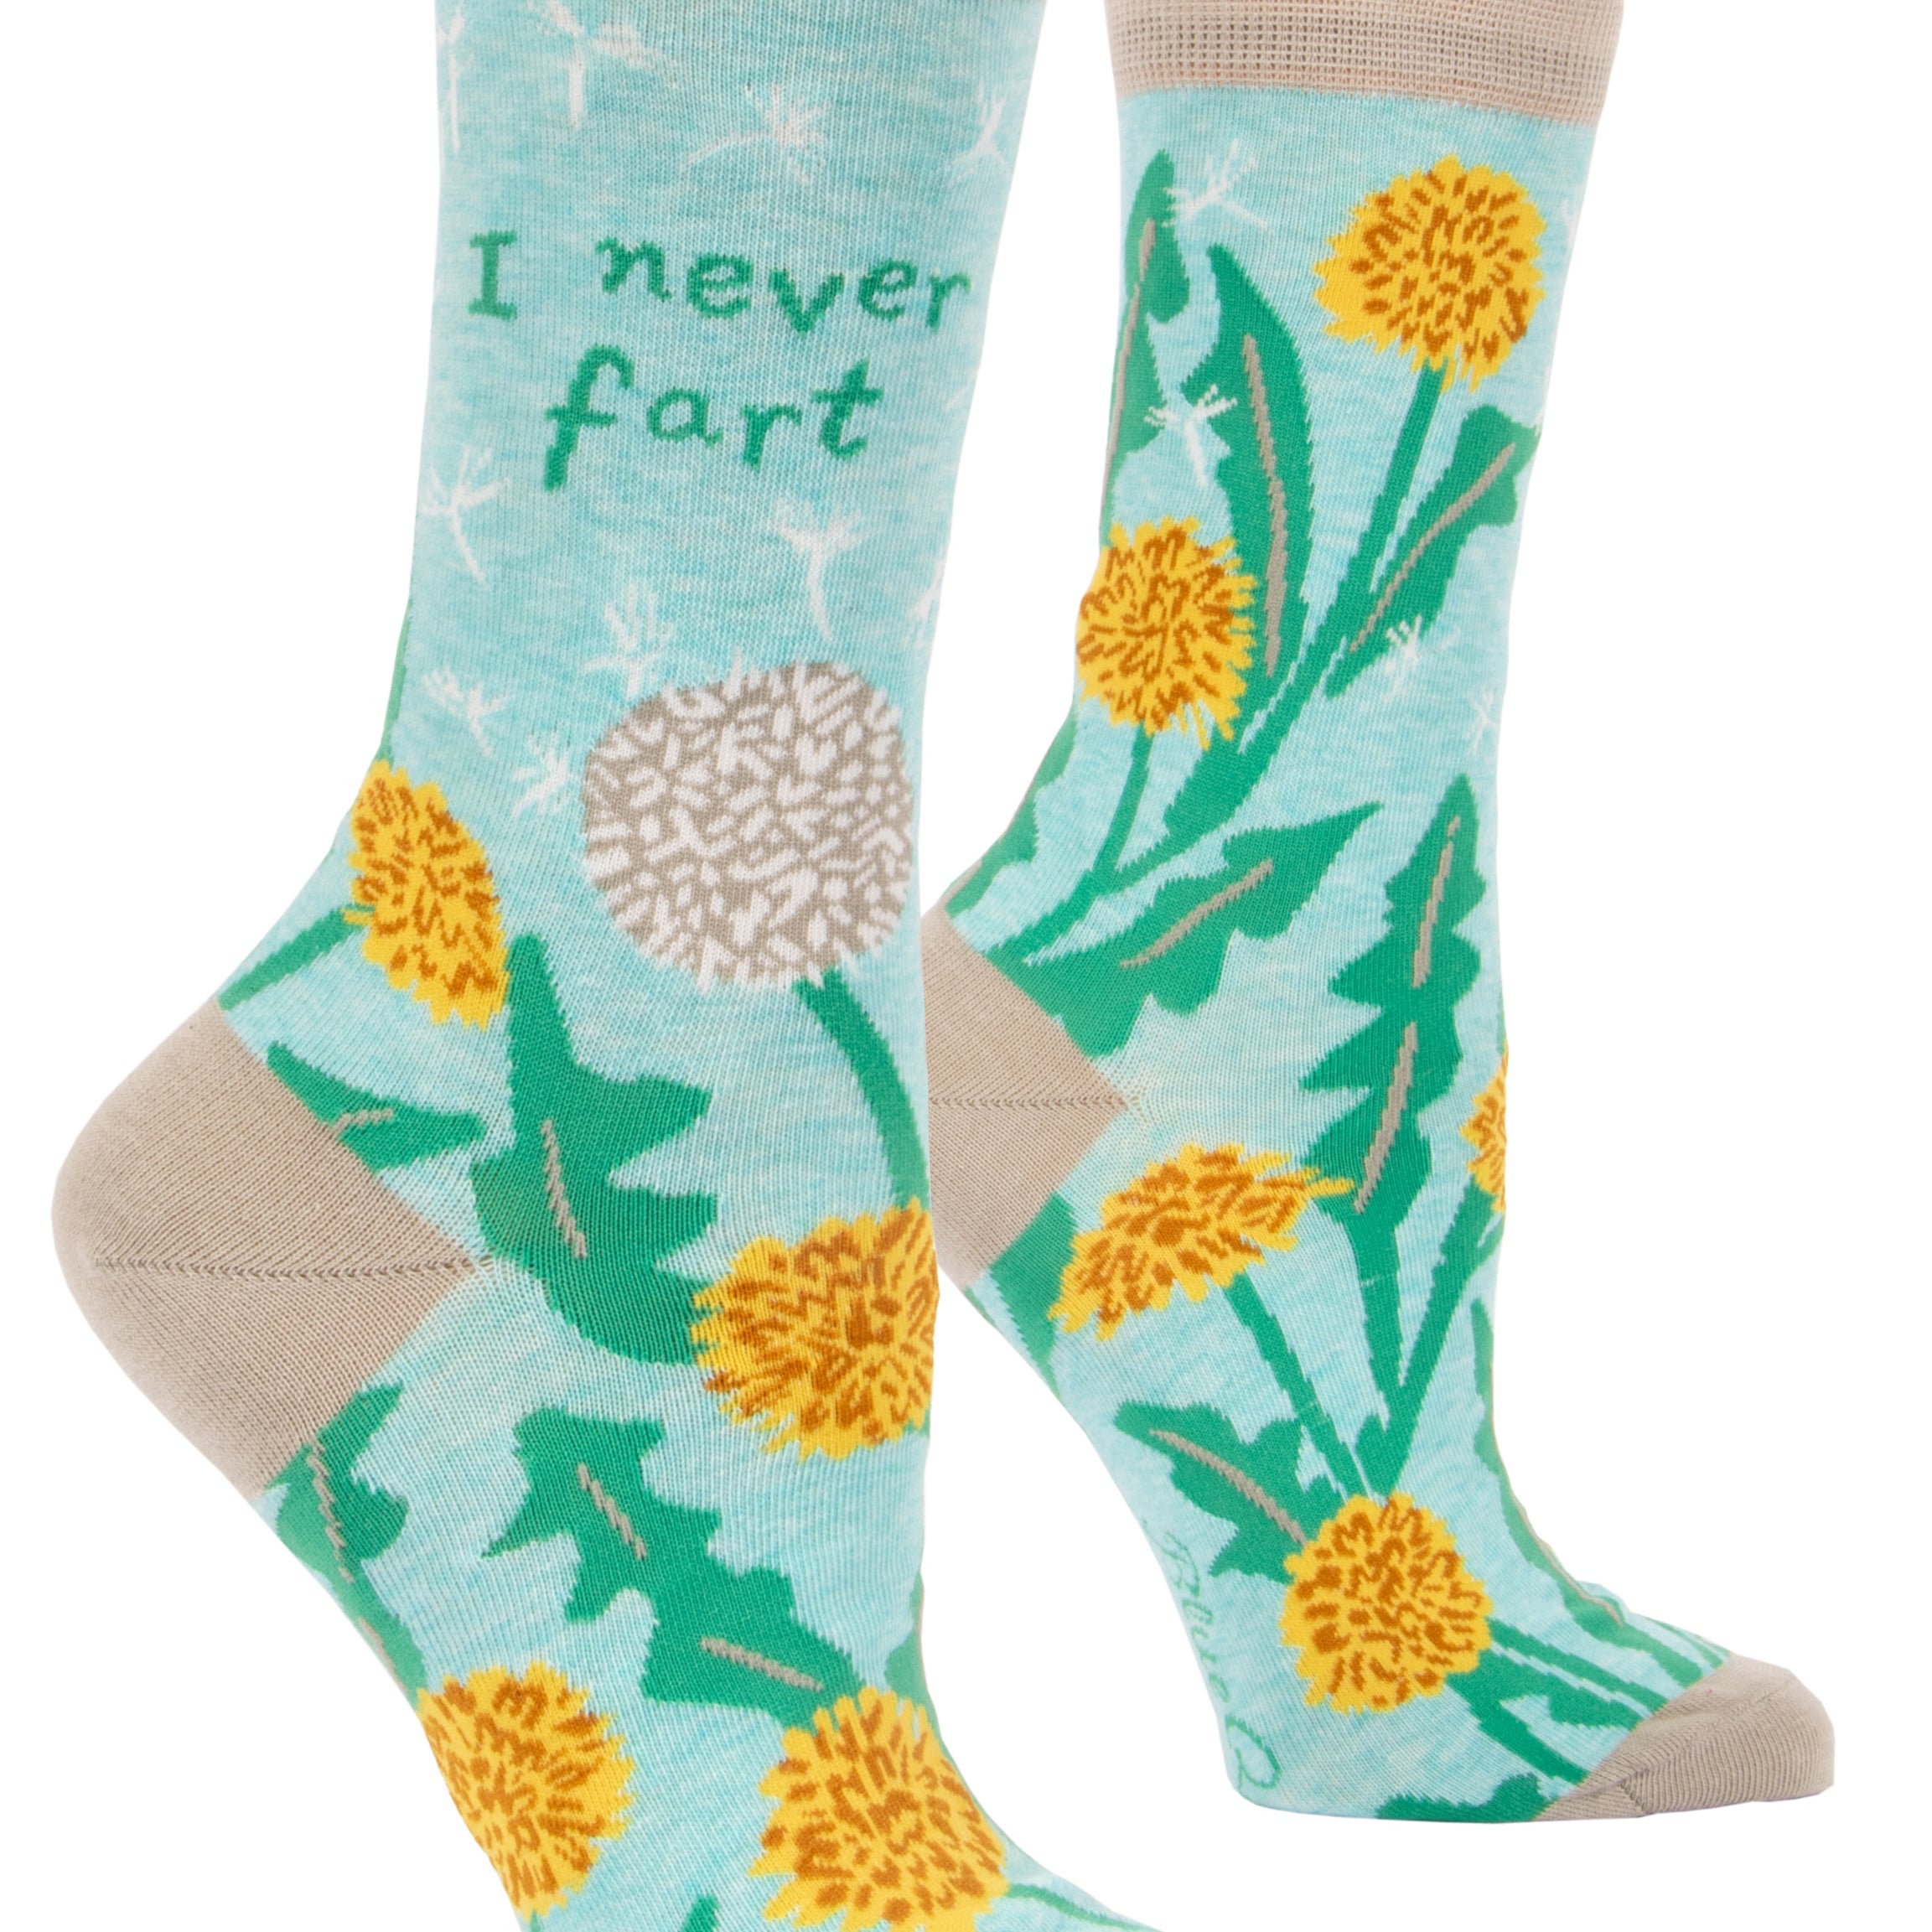 light blue socks with dandelions and on ankle they say i never fart